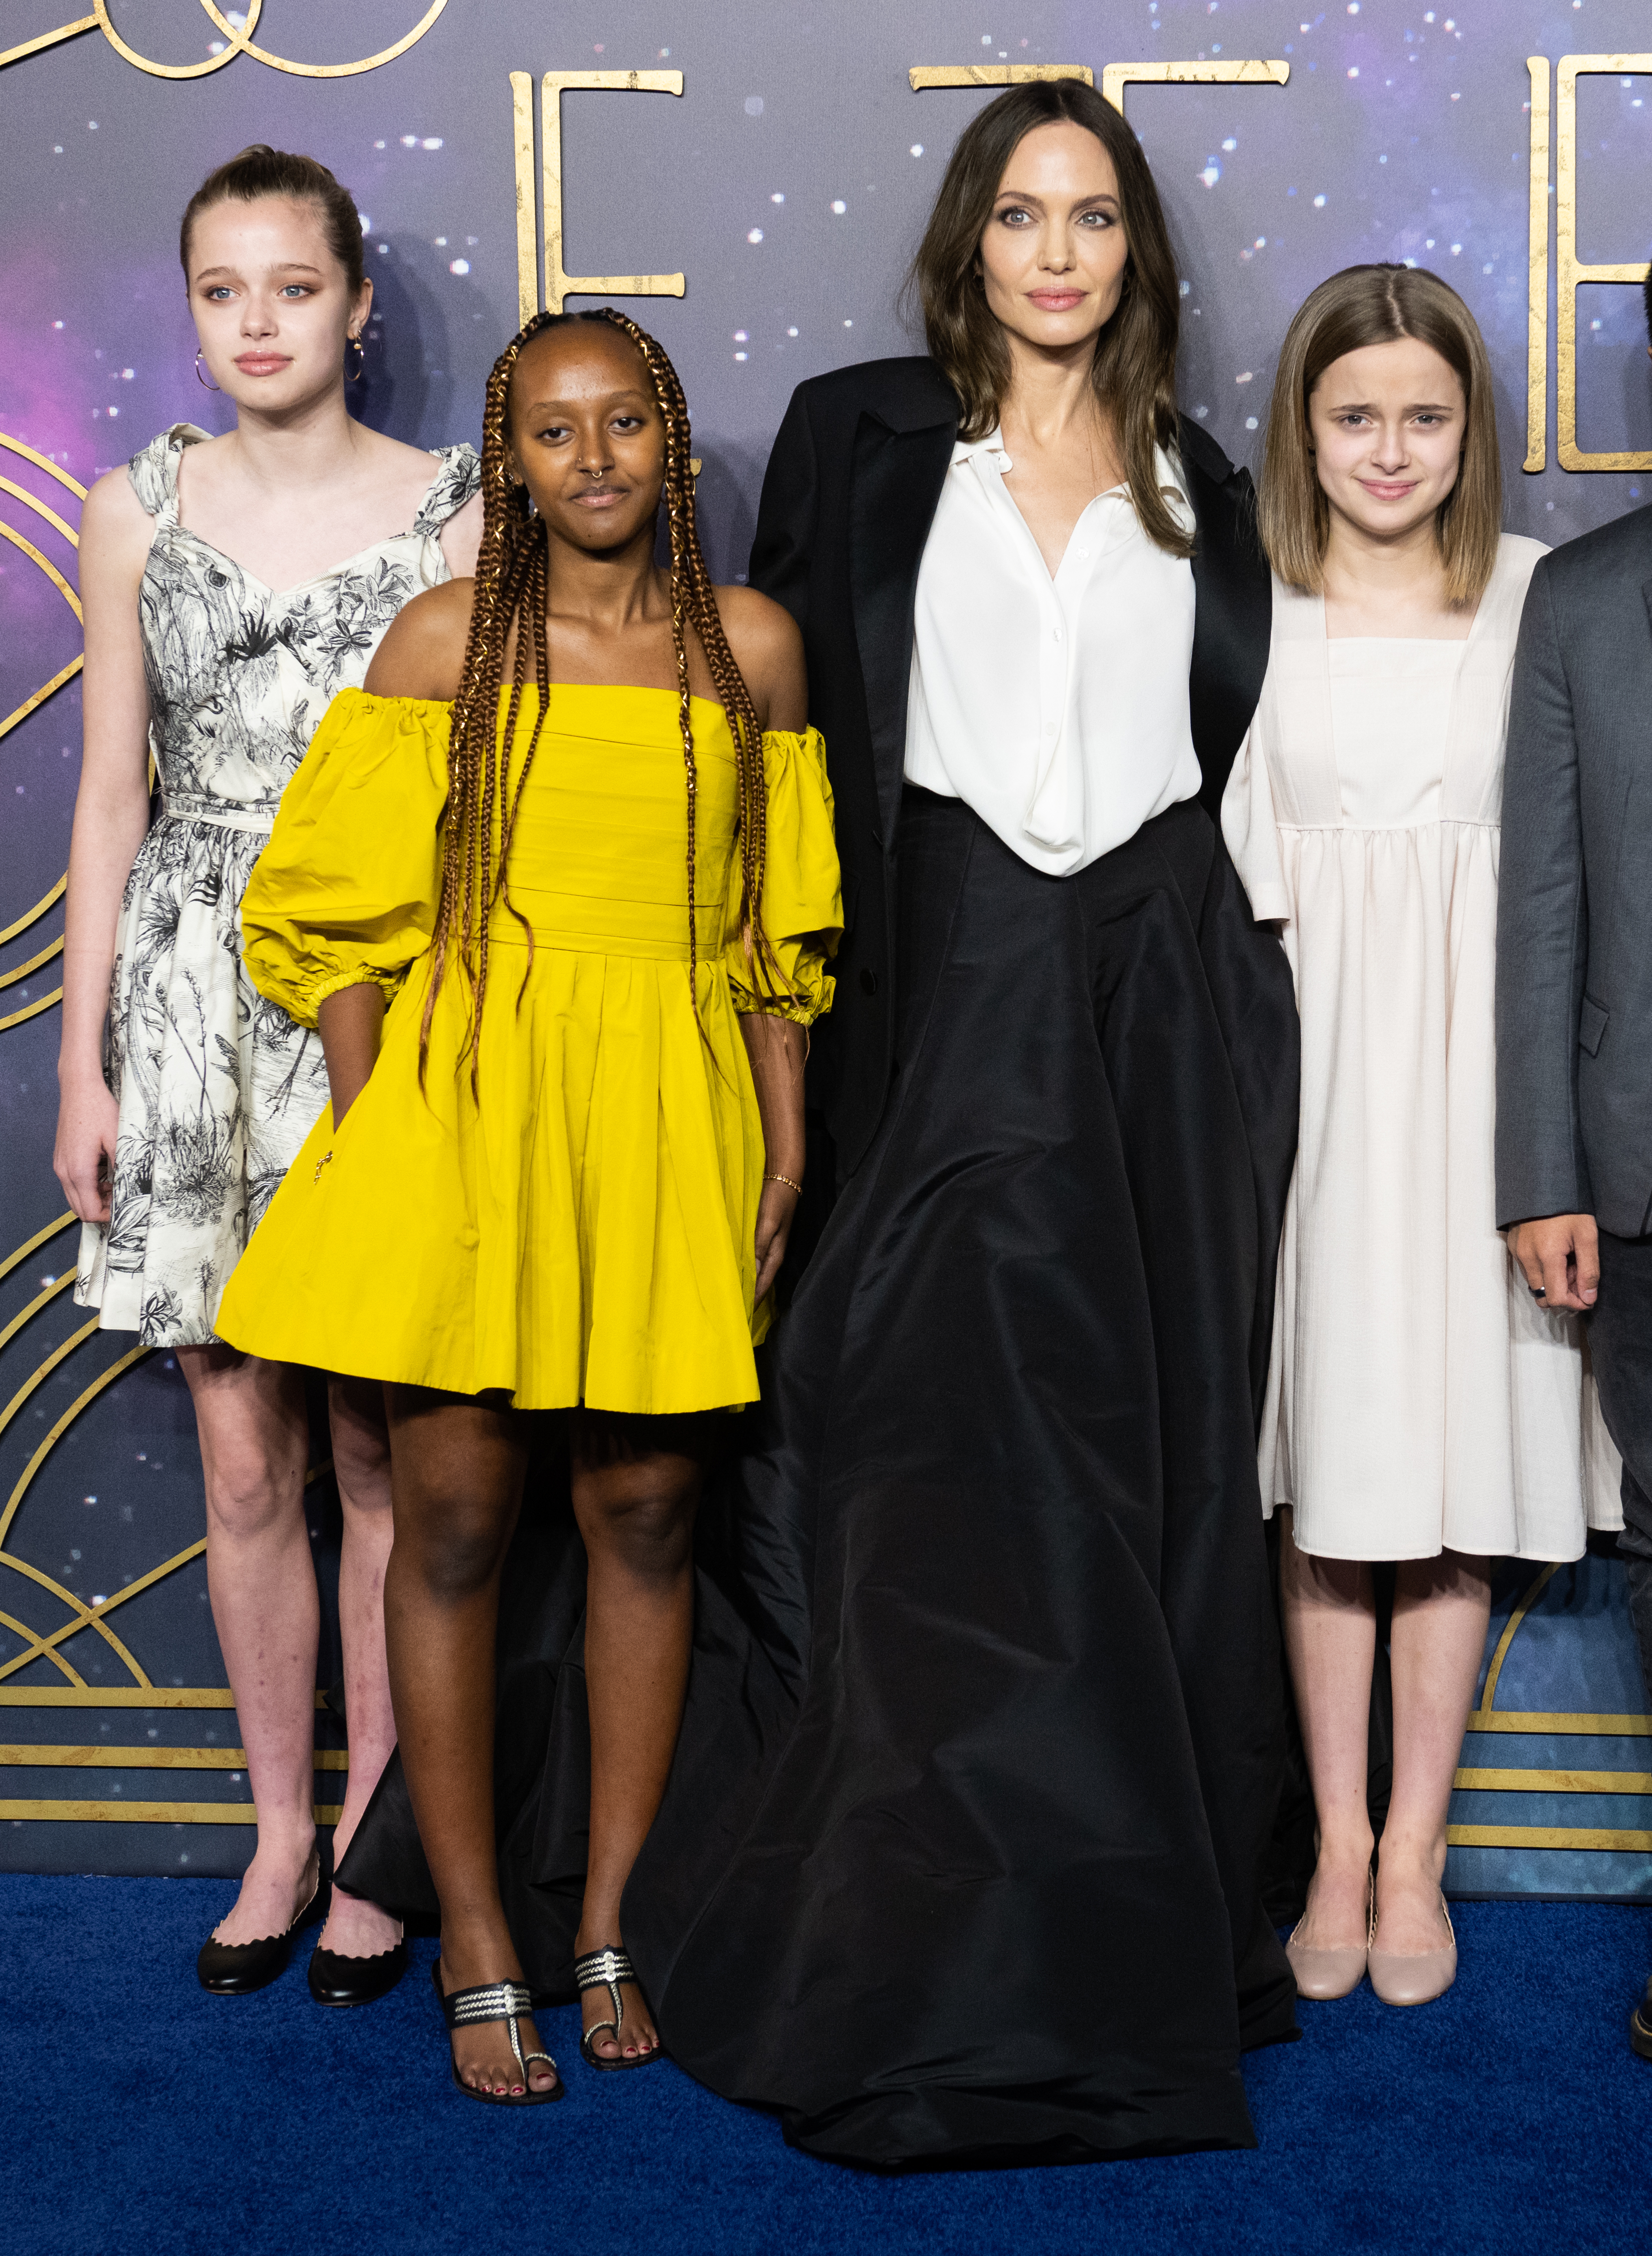 Shiloh, Zahara, Angelina Jolie, and Vivienne Jolie-Pitt at BFI IMAX Waterloo on October 27, 2021 in London, England | Source: Getty Images